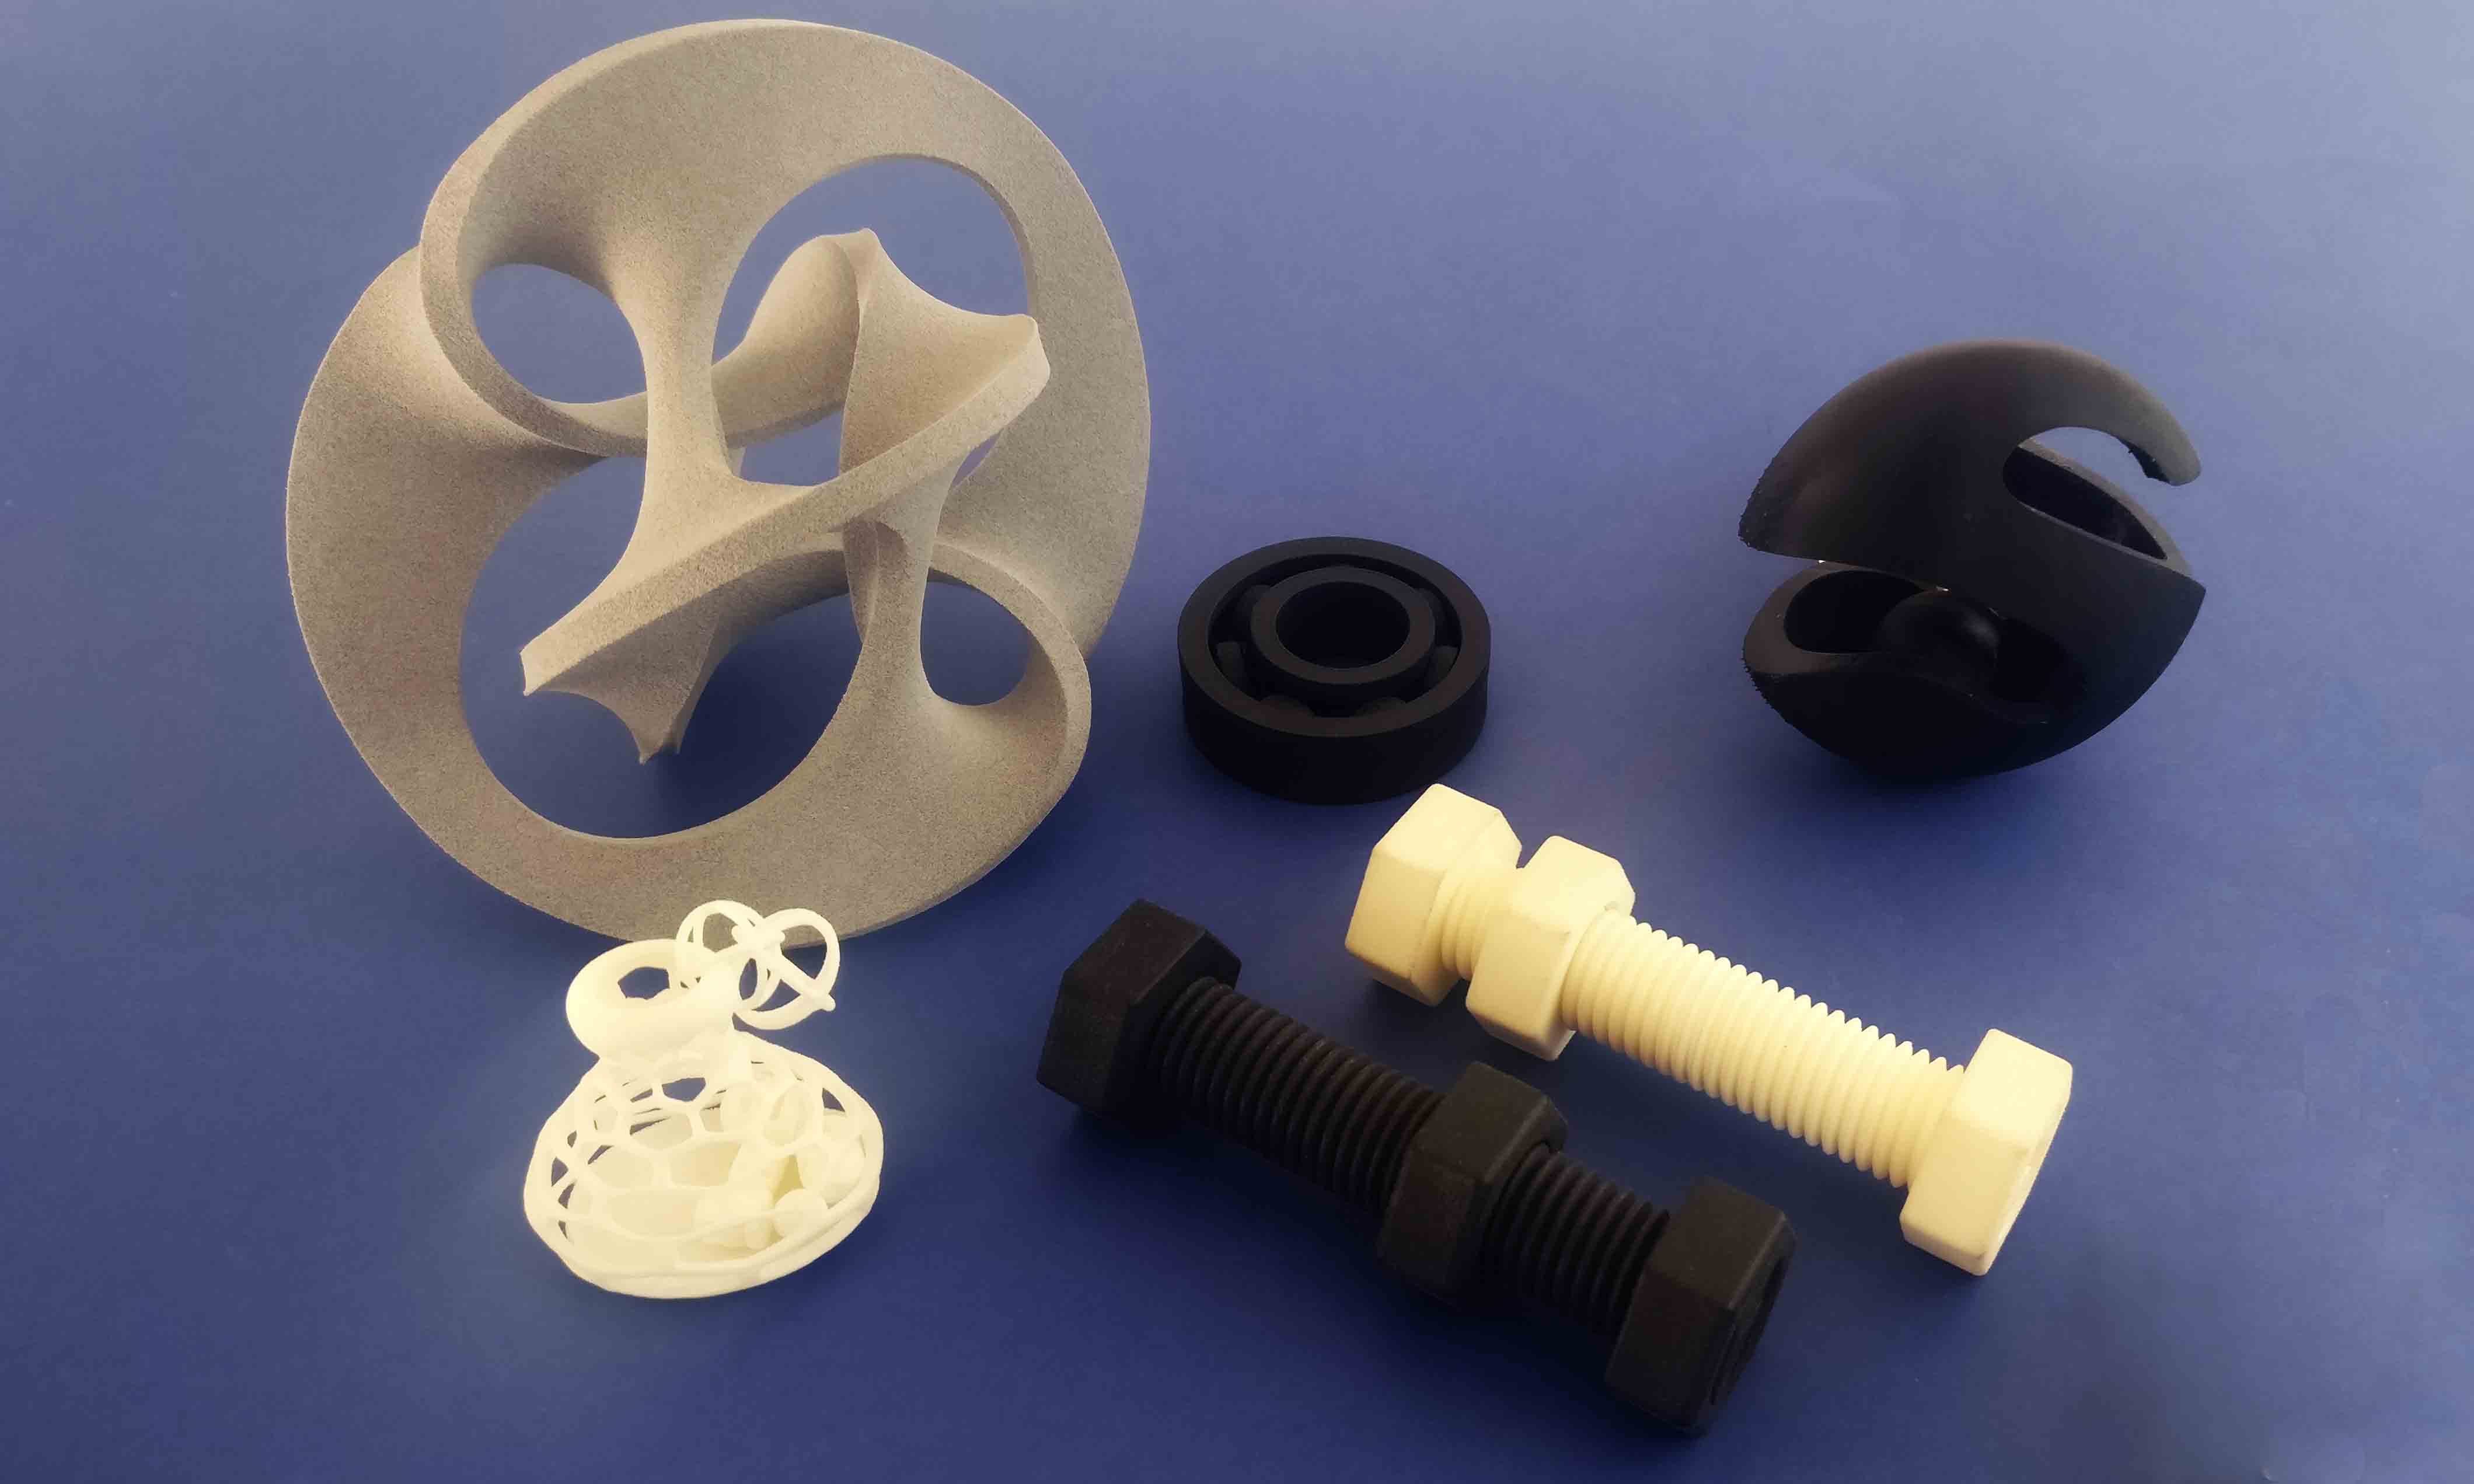 Benefits of 3D Printing: Impossible Designs and Internal Channels